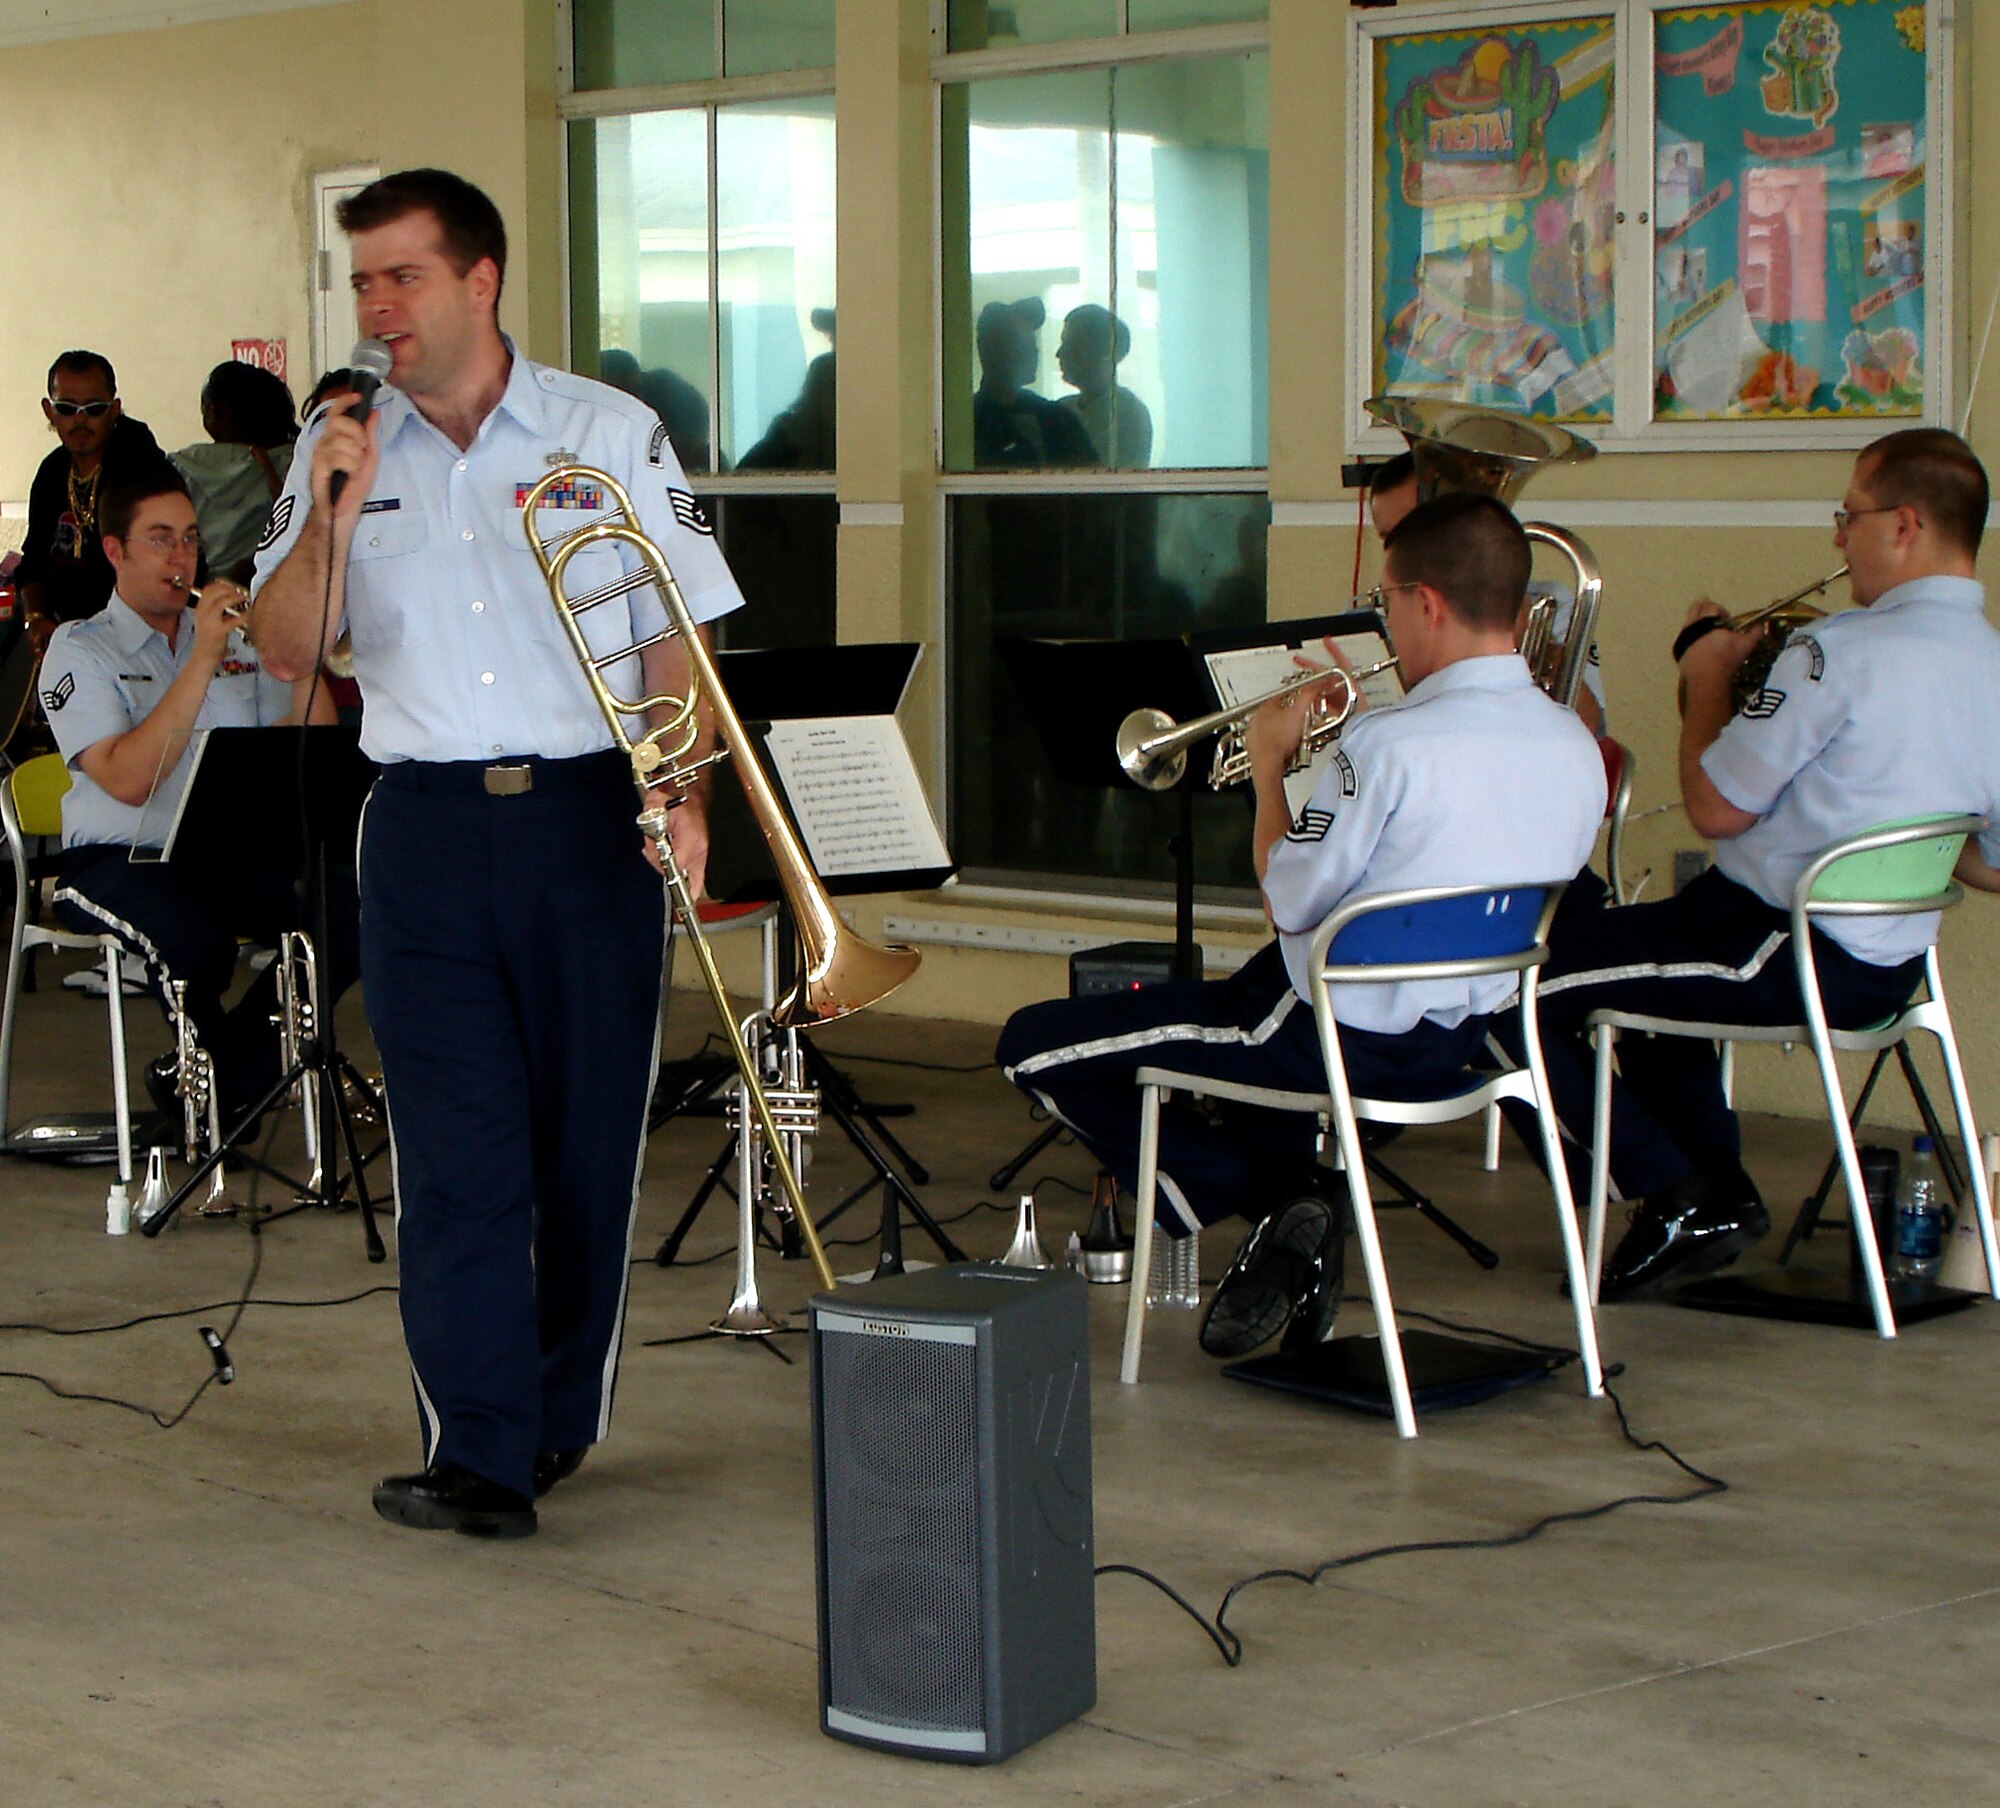 Staff Sgt. John Caputo belts out a James Brown tune during a concert at Community Partnership for Homeless in Homestead, Fla.  The band played a total of nine performances during a three day period in Miami-Dade County focused on thanking the community for their continued support of the Air Force Reserve.  Sergeant Caputo is a trombone player with the Band of the Air Force Reserve from Robins Air Force Base, Ga.  (U.S. Air Force photo/Tech. Sgt. Julie Briden-Garcia)